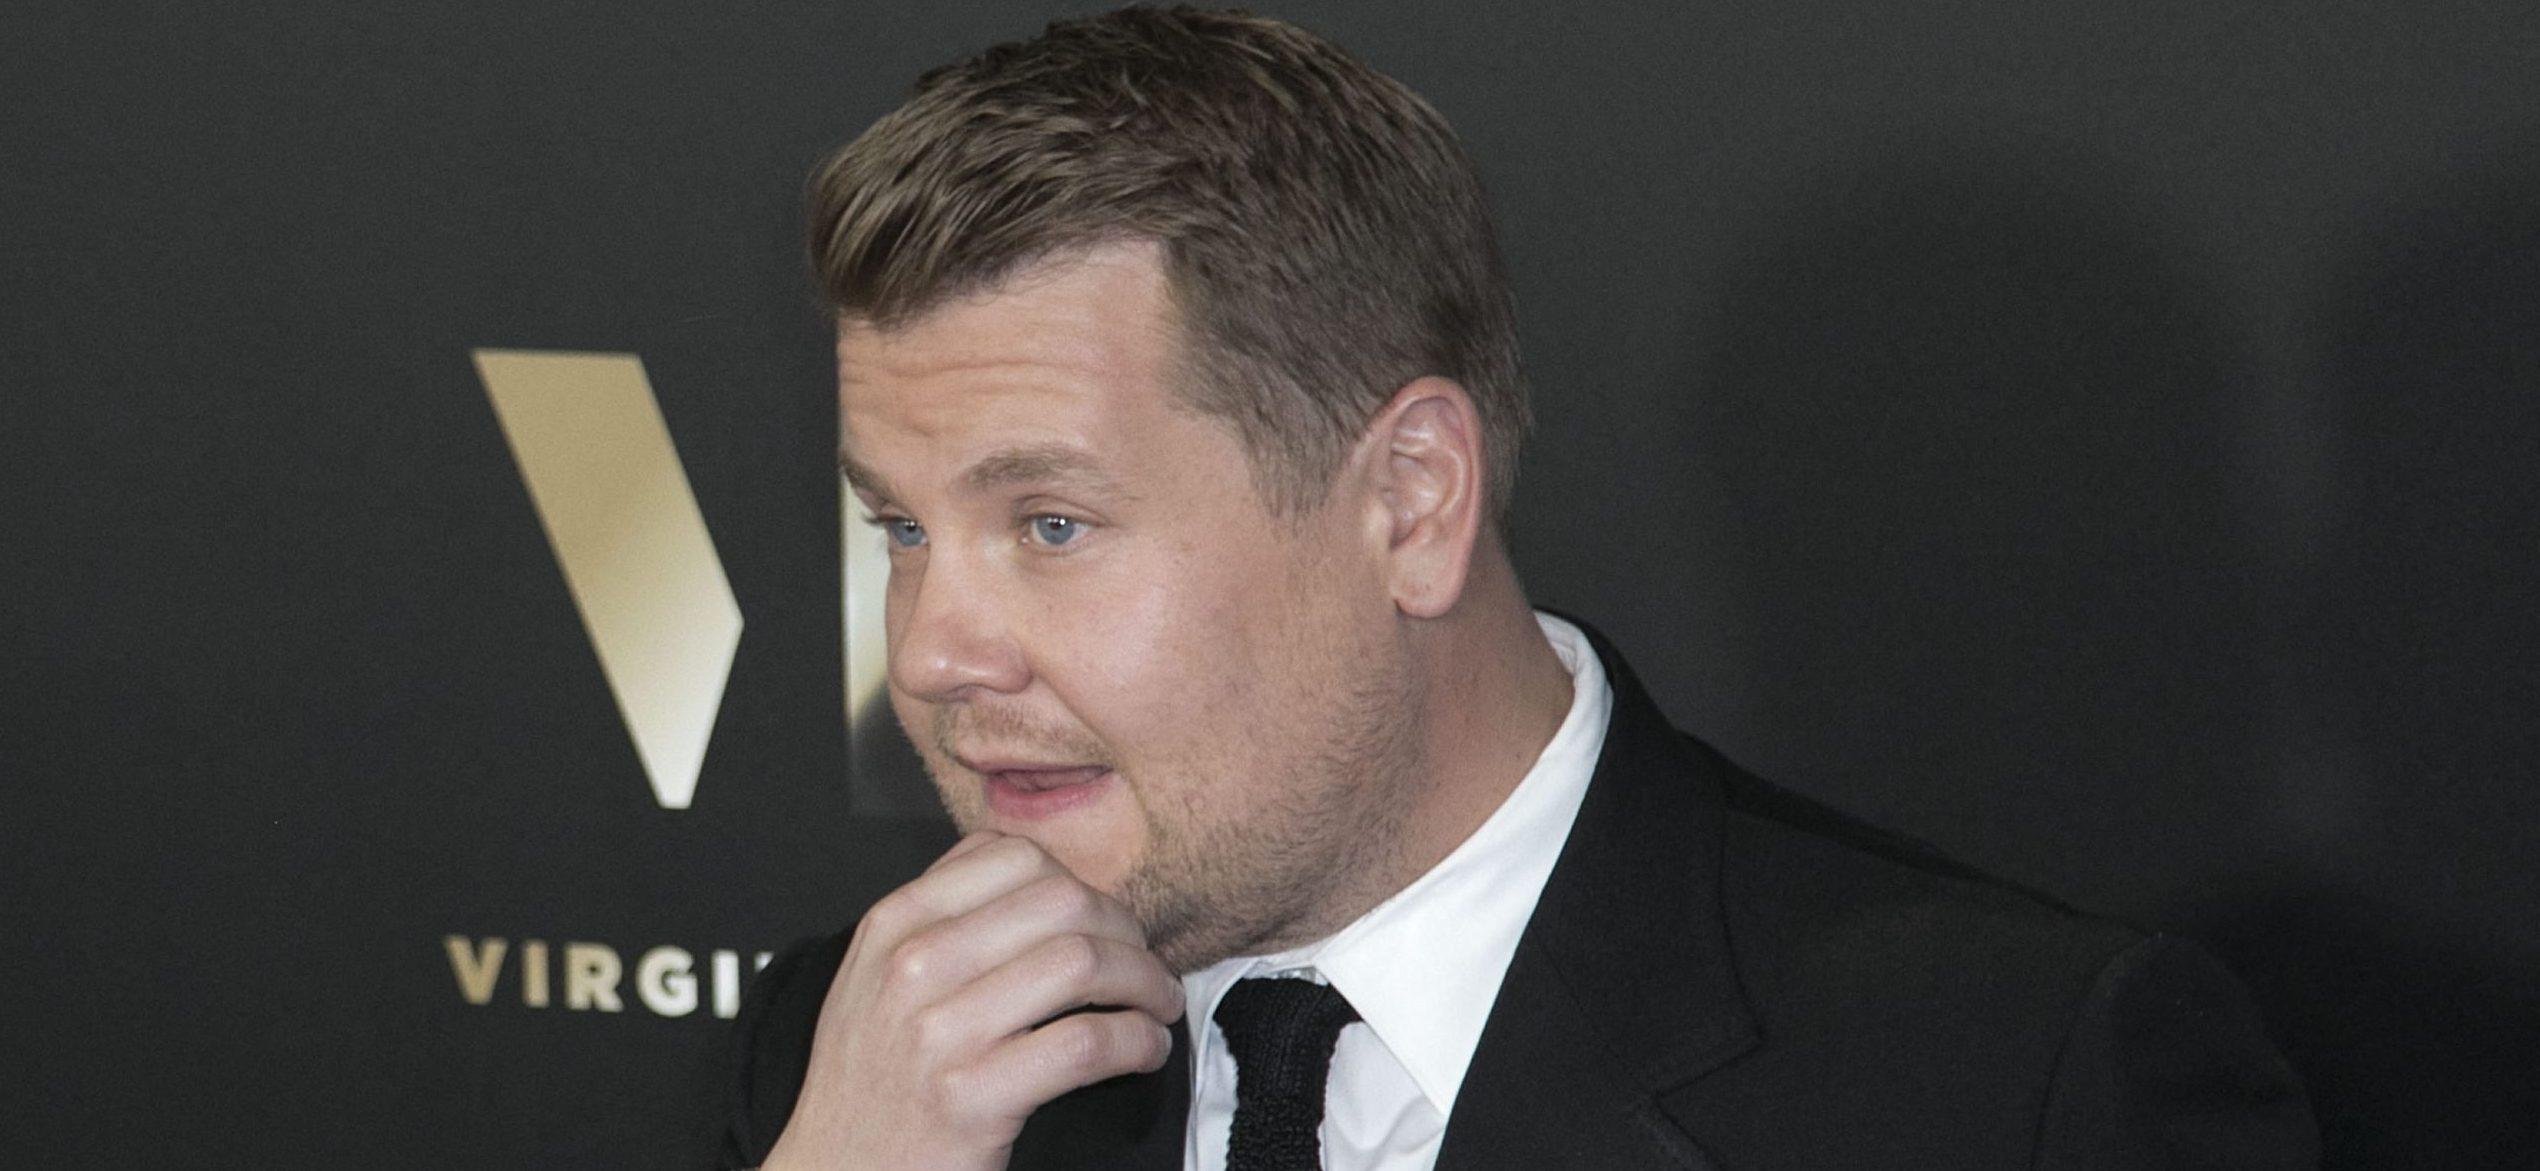 James Corden’s Character Takes Another Hit, Director Names Him ‘Most Difficult & Obnoxious Presenter’